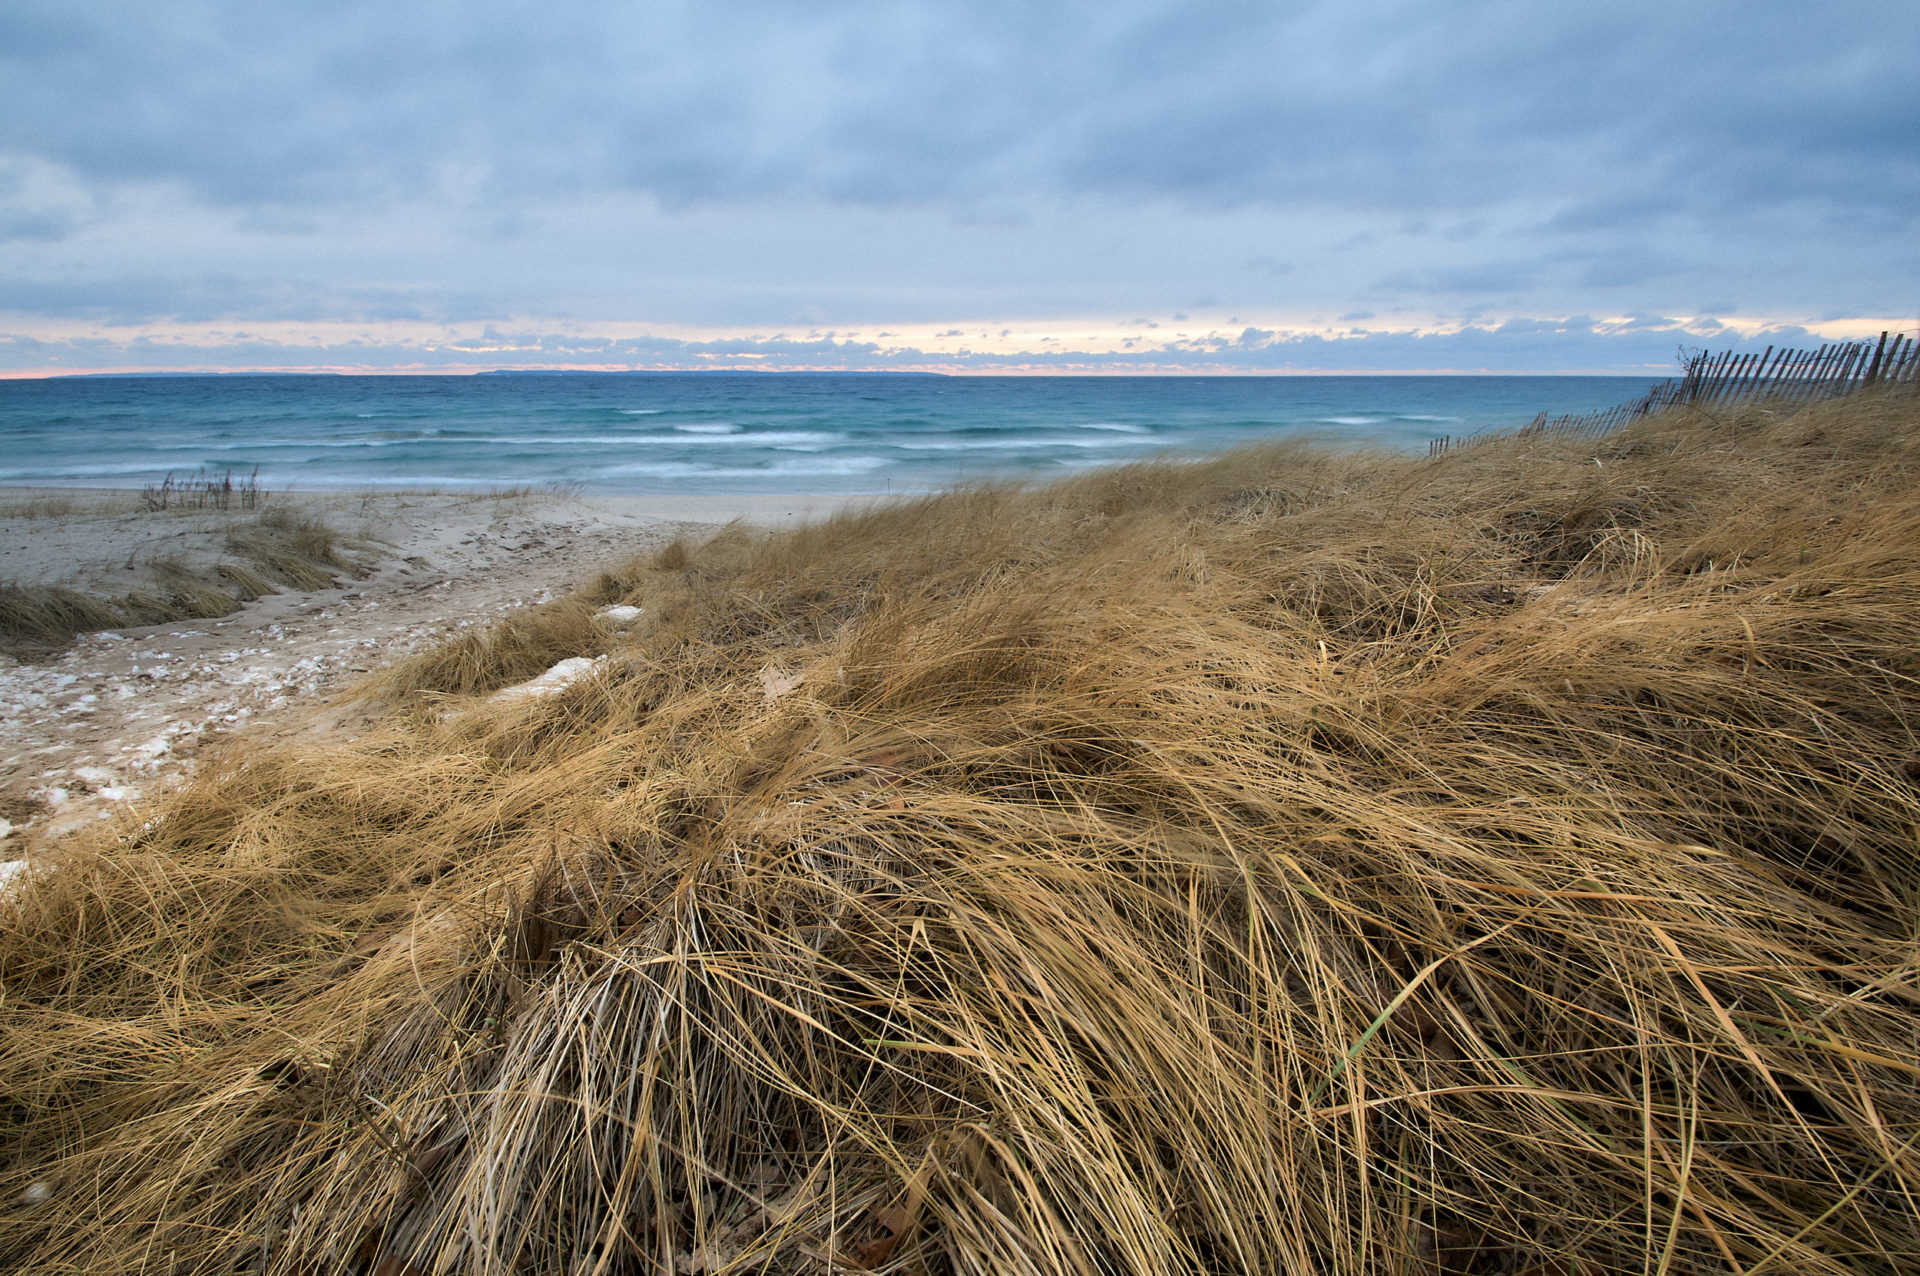 beach scene looking at Lake Michigan over dune grass on a stormy day